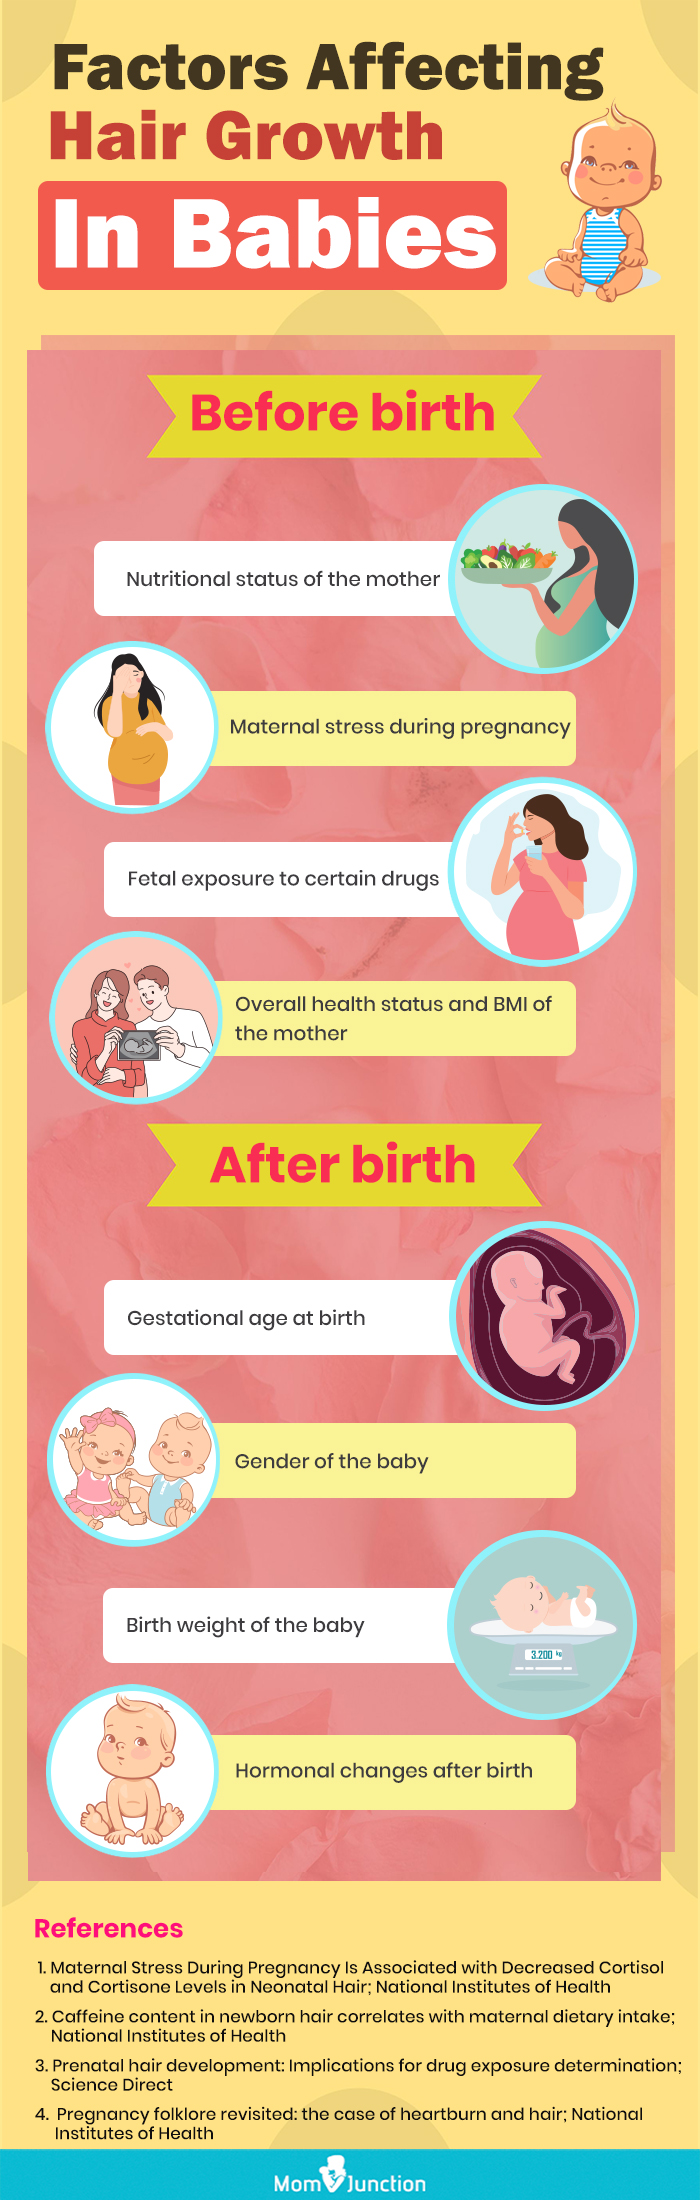 factors affecting hair growth in babies [infographic]